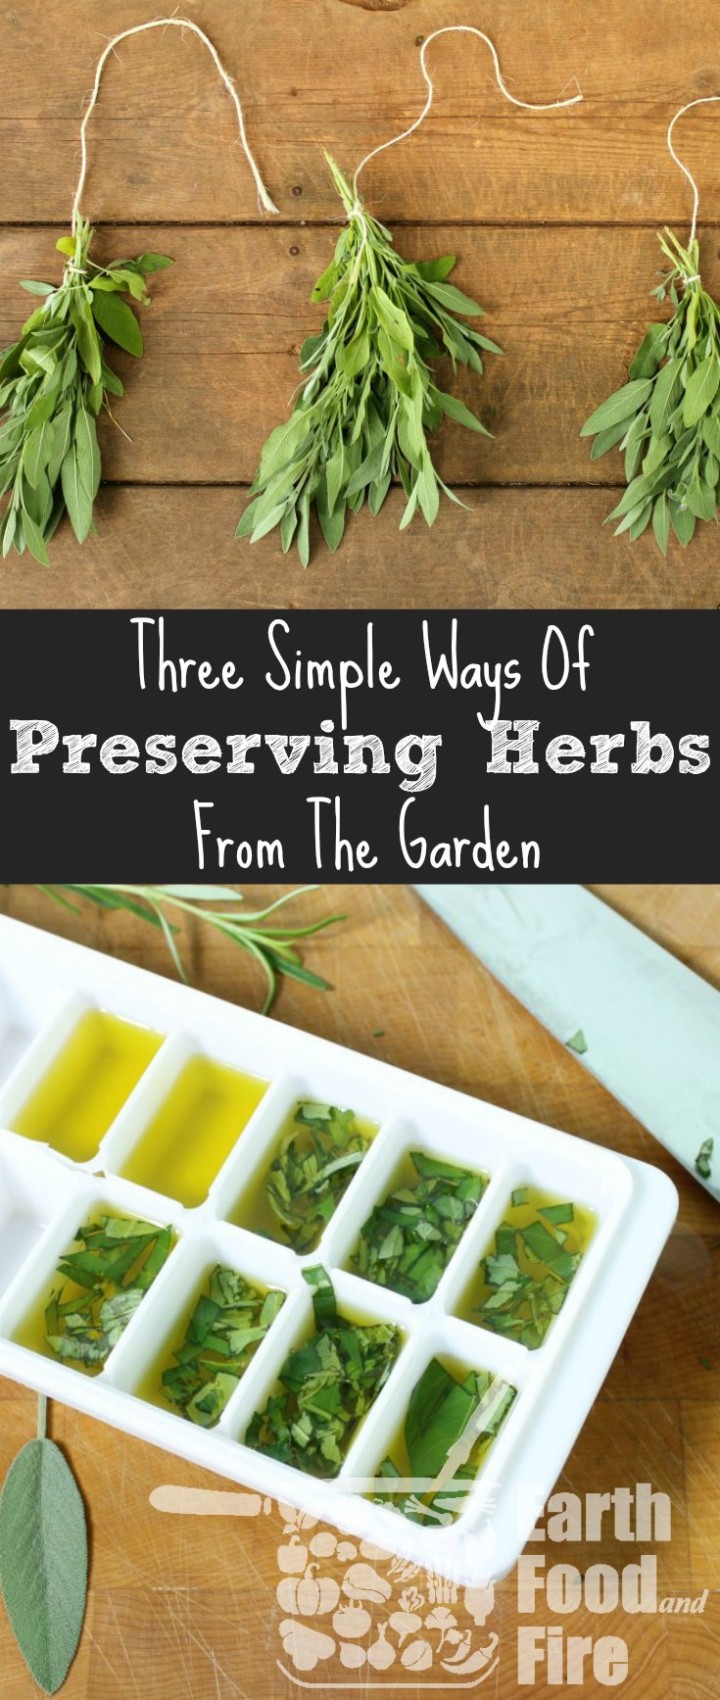 Preserving herbs is an easy way to save money, stock your spice shelf, and create homemade condiments. Learn the 3 easiest ways to store your fresh herbs, including drying herbs, and infusing your own oils!